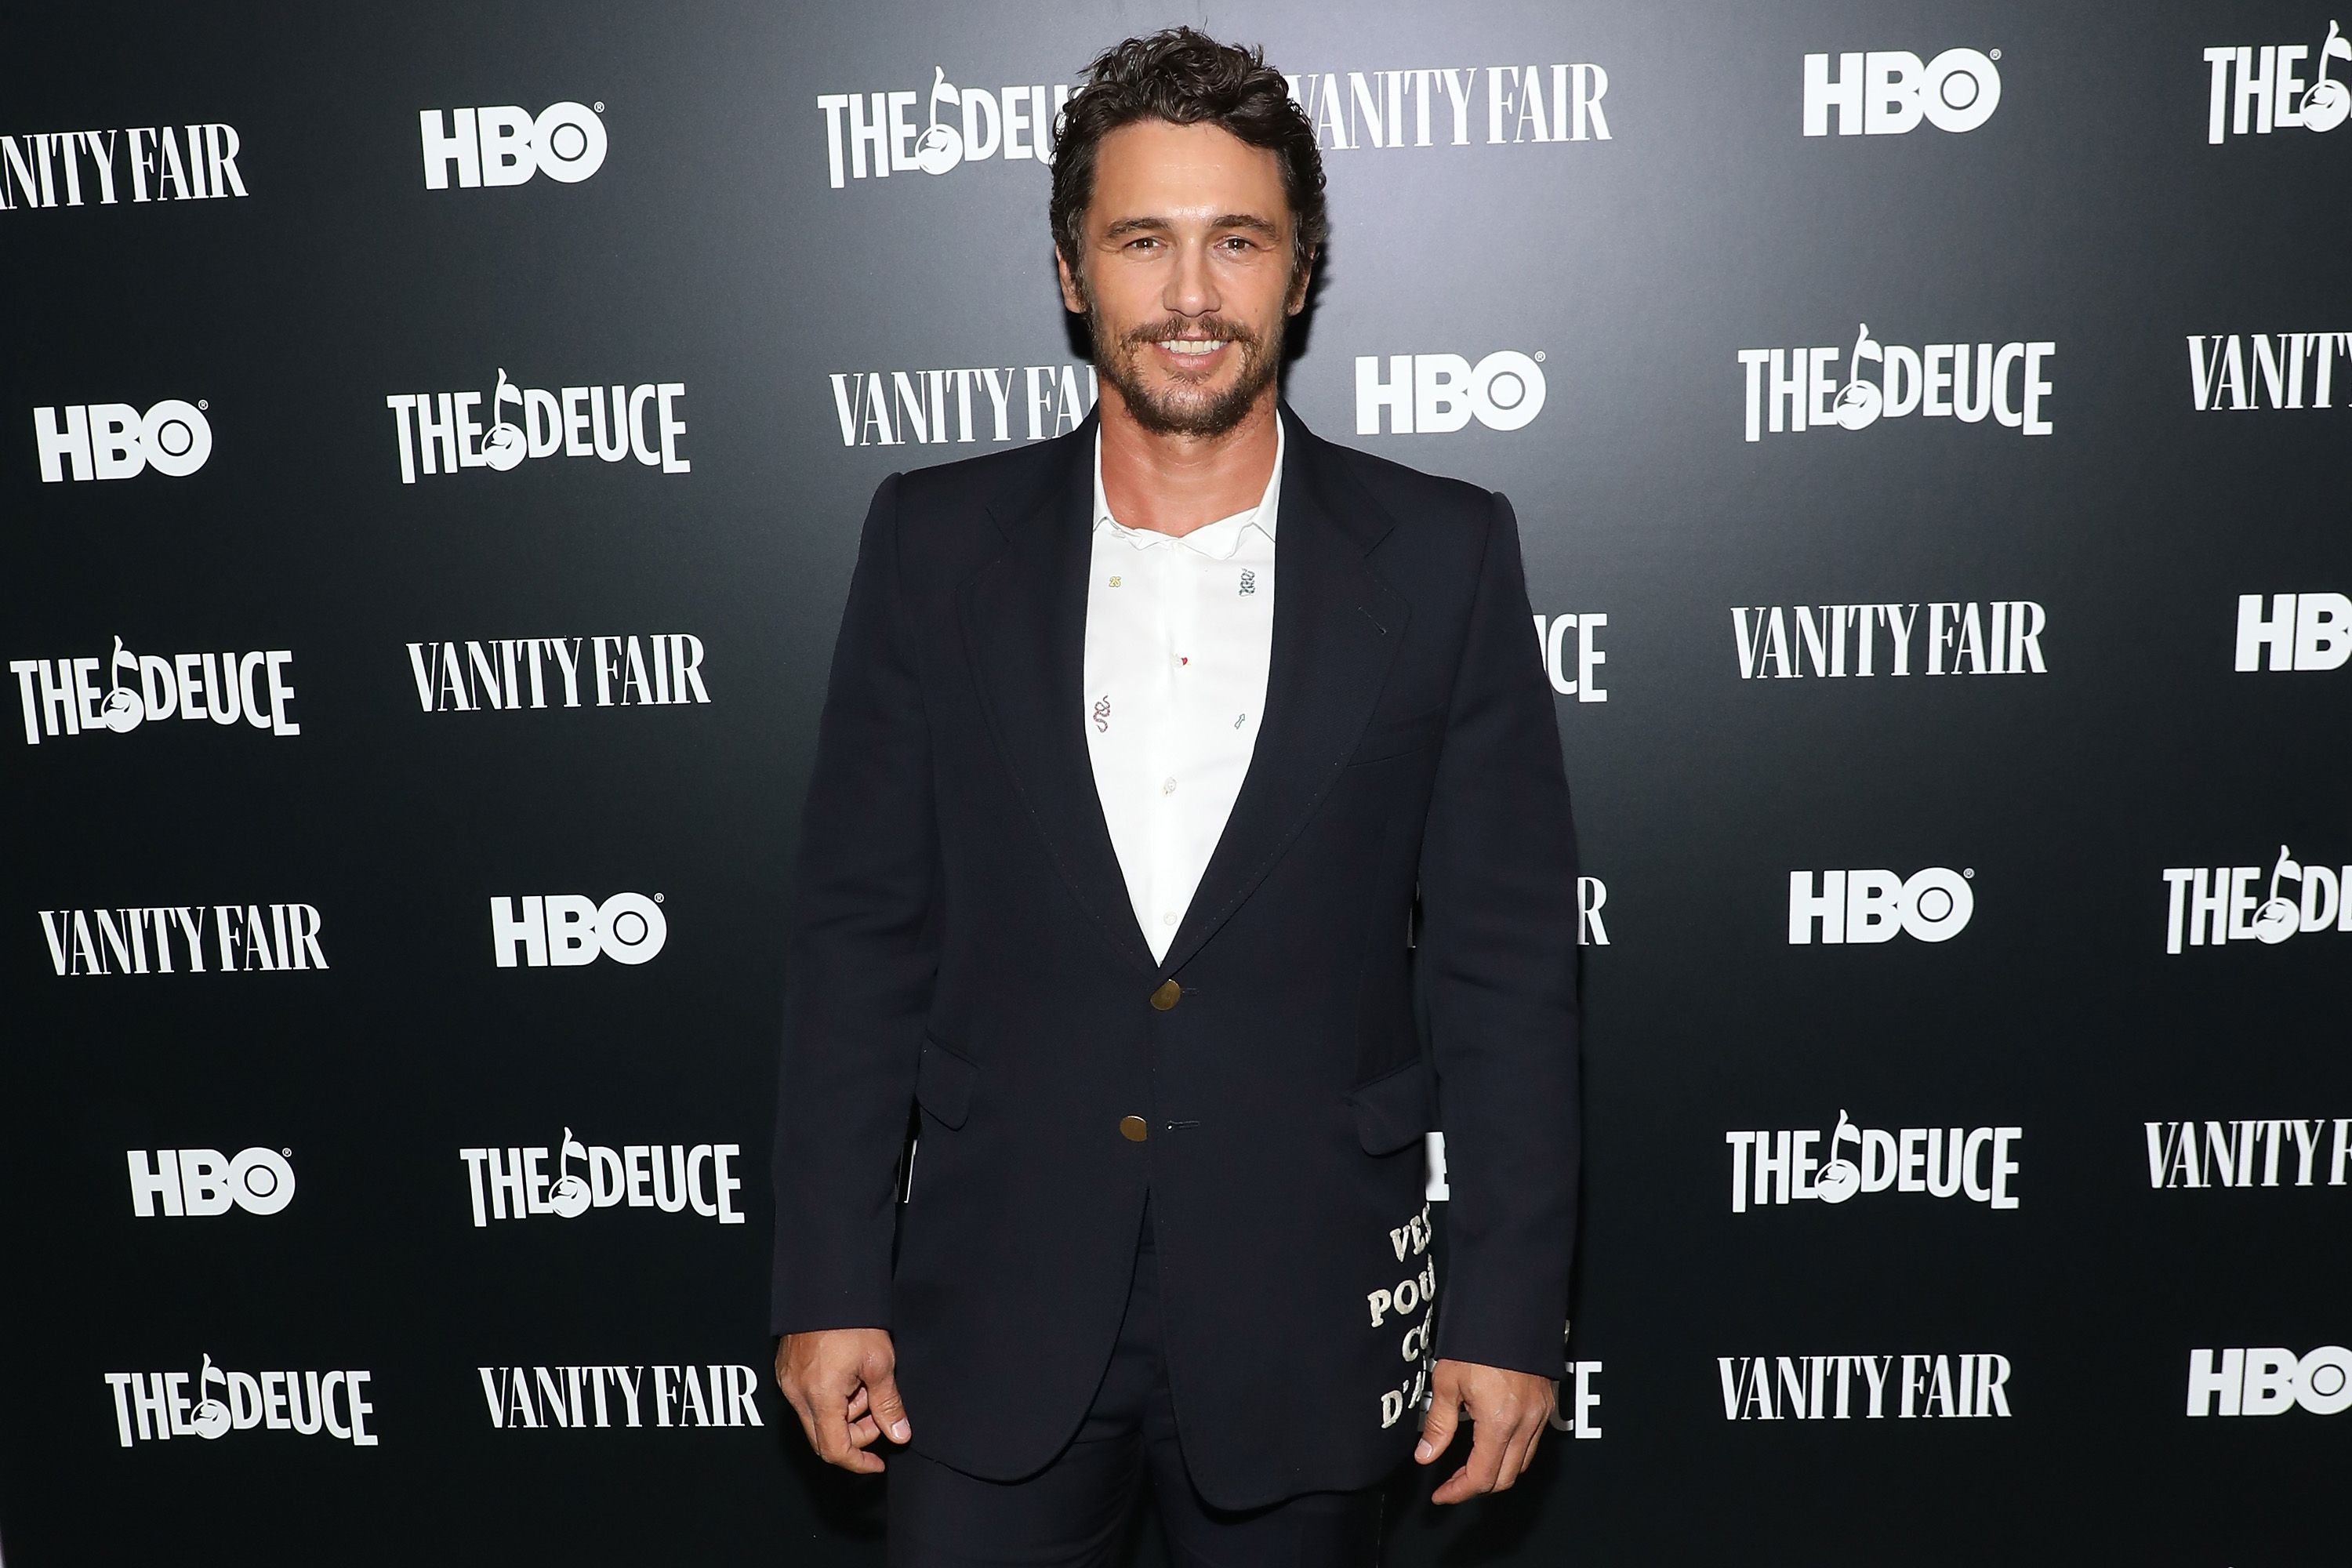 James Franco during the special screening of the final season of "The Deuce" at Metrograph on September 05, 2019 in New York City. | Source: Getty Images